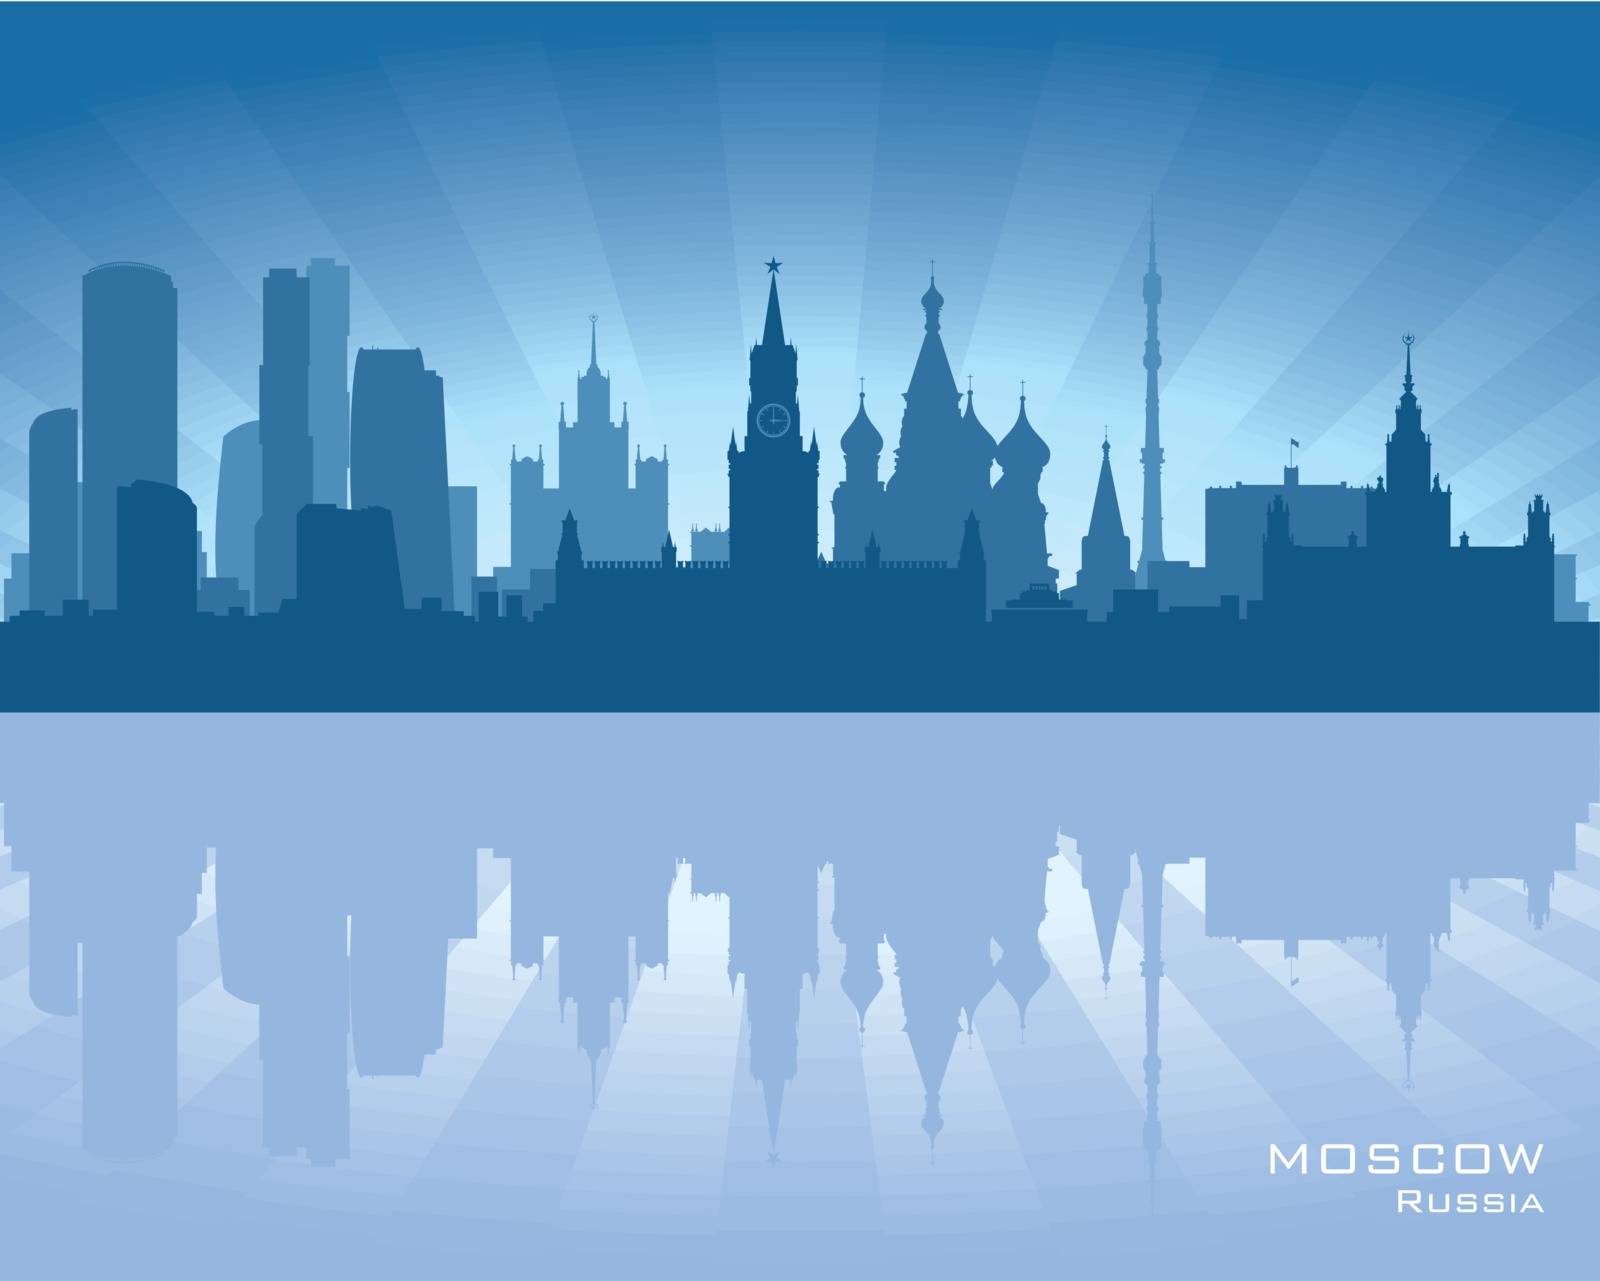 Moscow, Russia skyline by yurkaimmortal